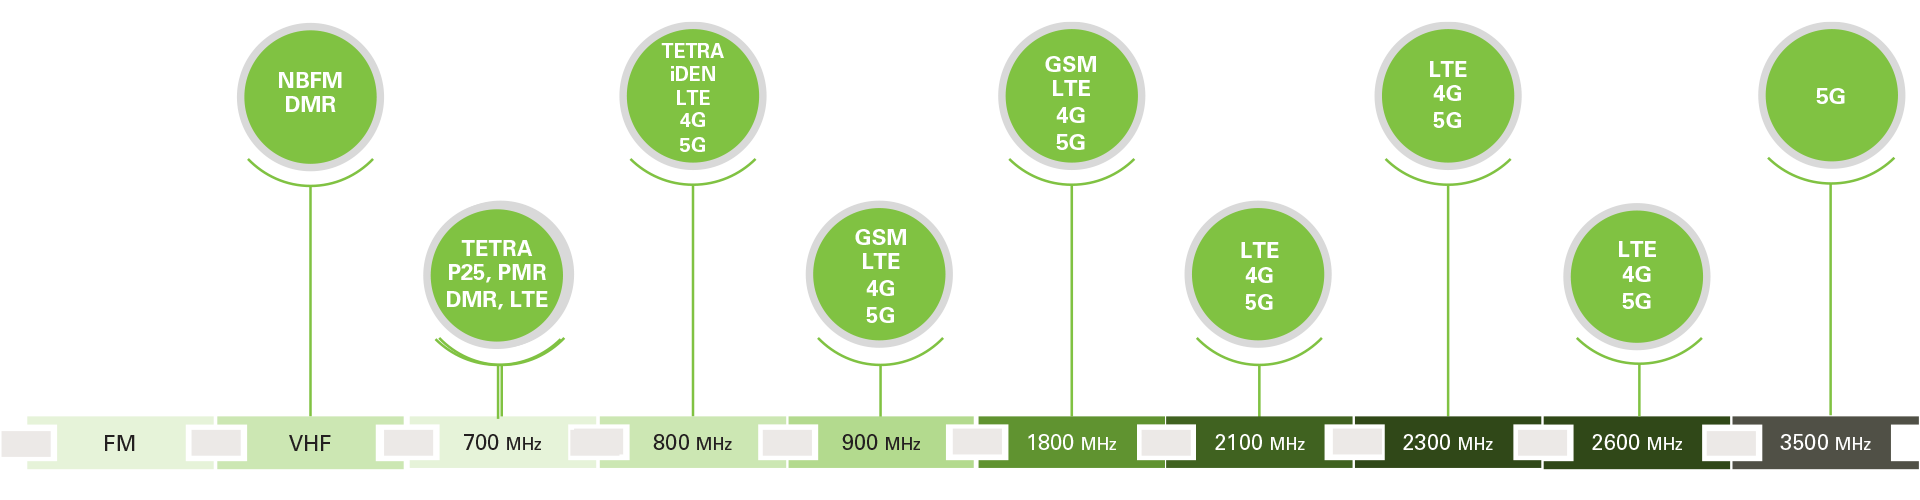 Axell digital connect frequencies and bands